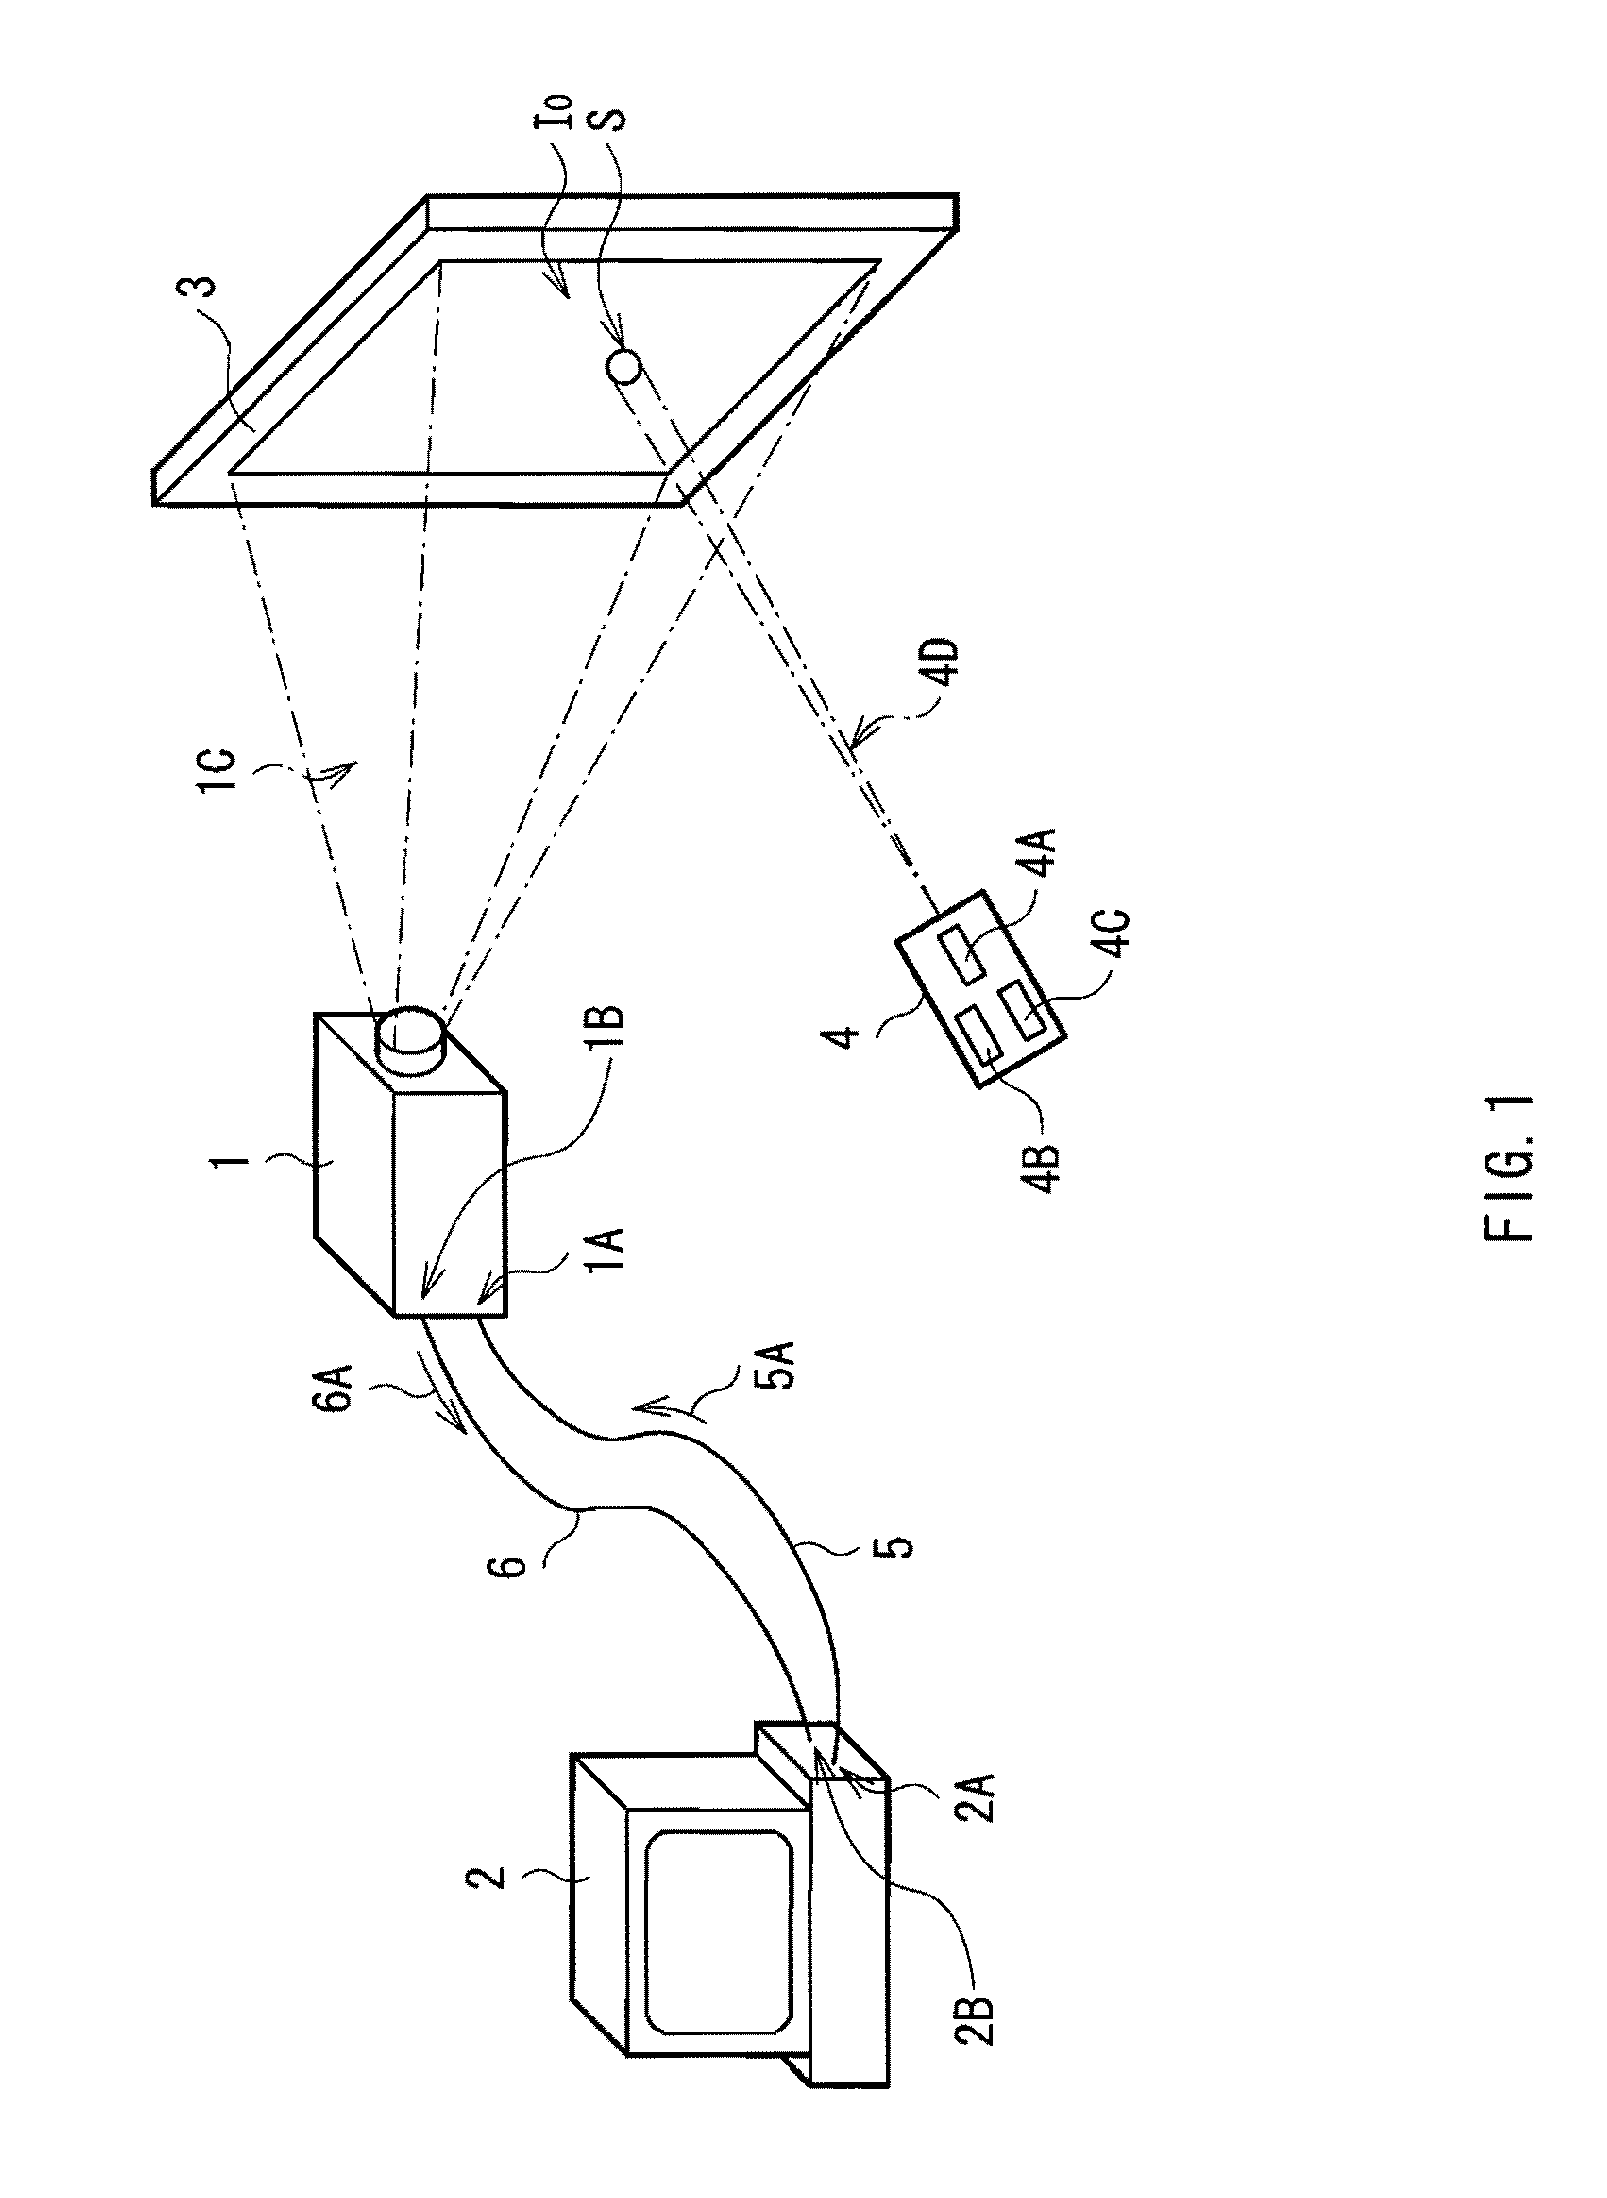 Image display device and position detecting method